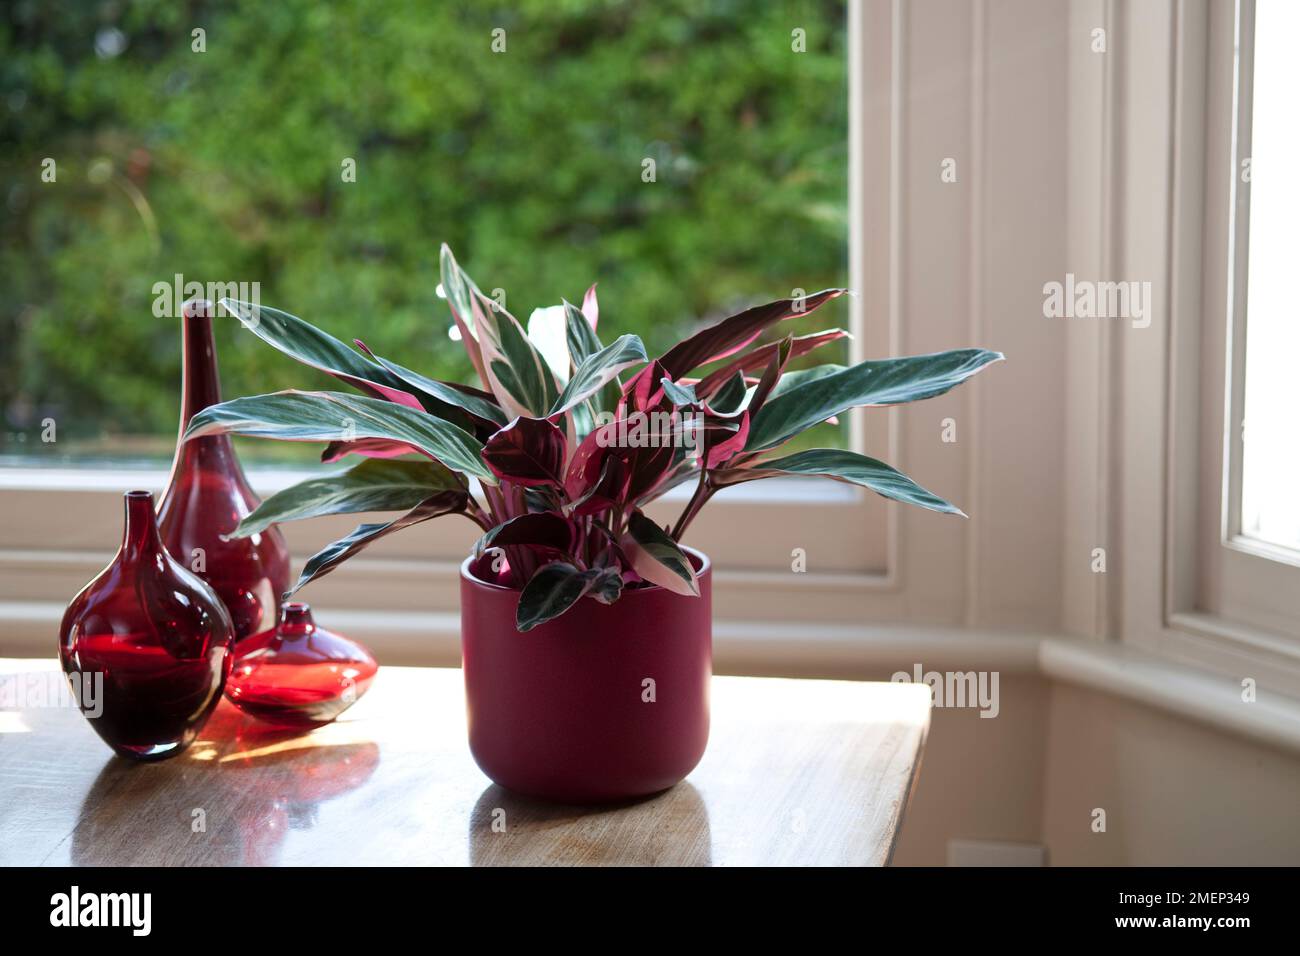 Stromanthe sanguinea 'Triostar' in dark red container on polished wooden table, with coloured glass bottles Stock Photo